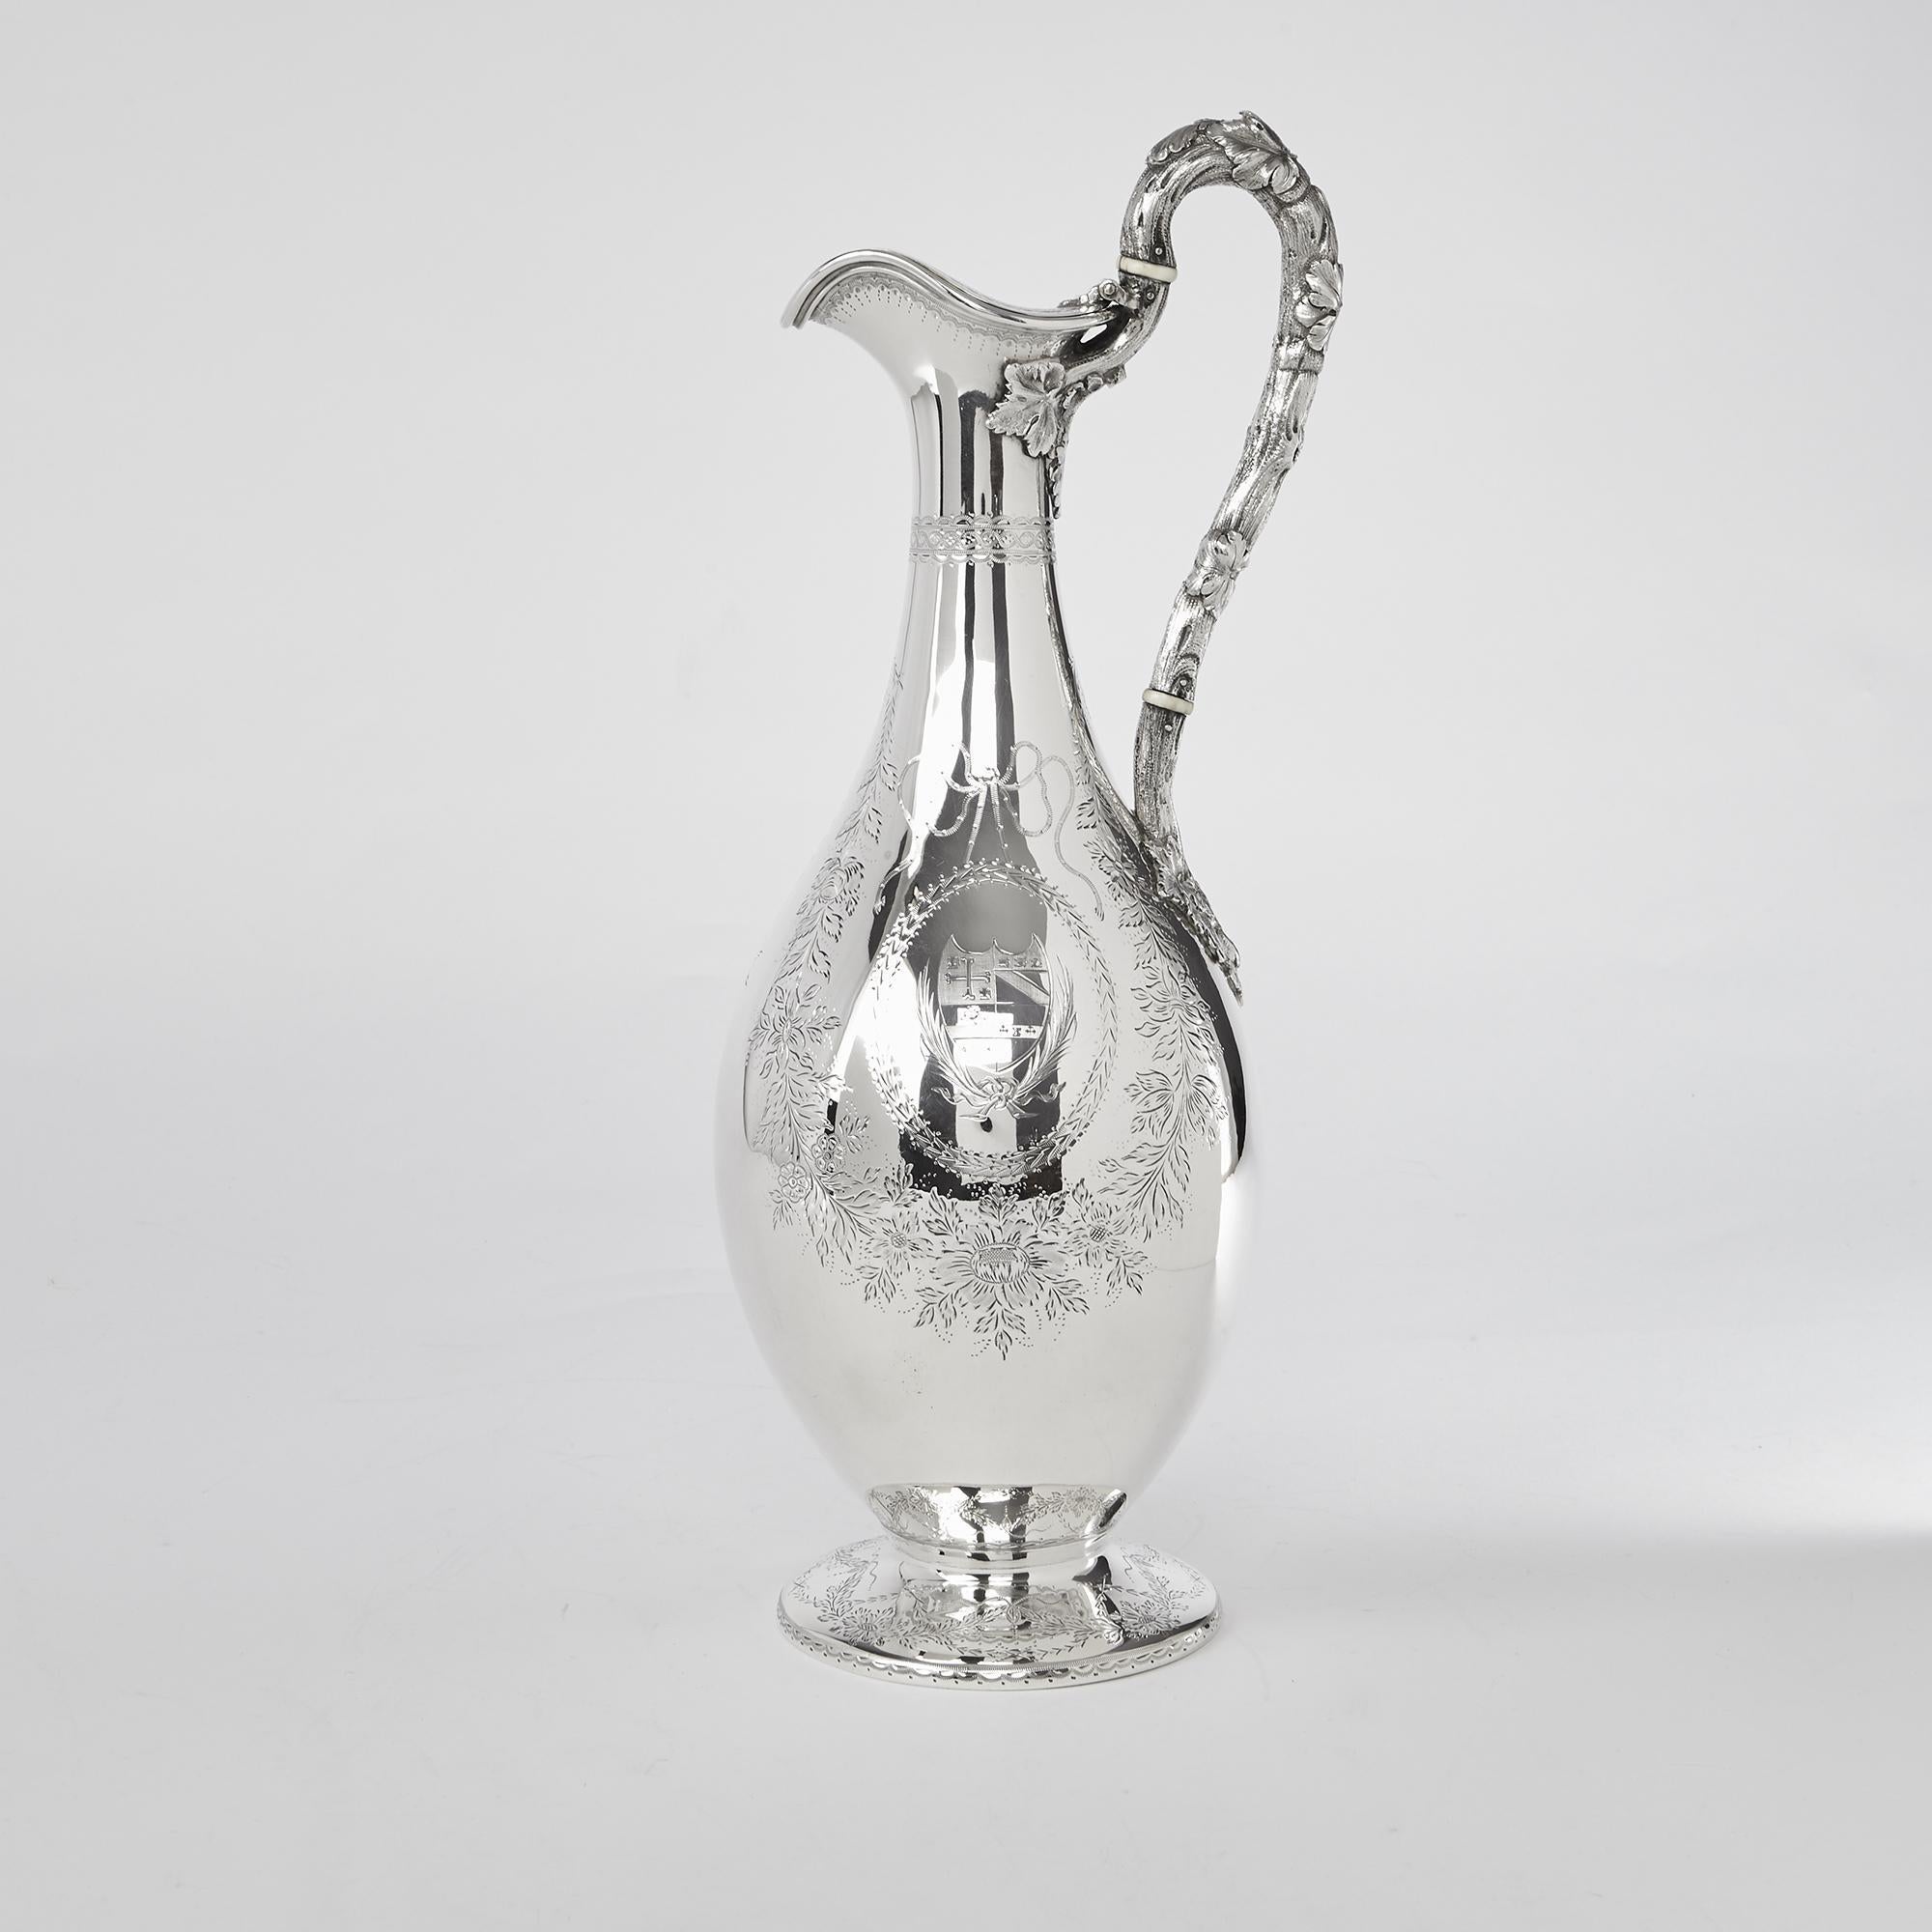 An extremely elegant Victorian silver claret jug with pear-shaped body decorated with hand-engraved floral swags and garlands. It has an oval cartouche on either side containing family arms and a banner on one side engraved 